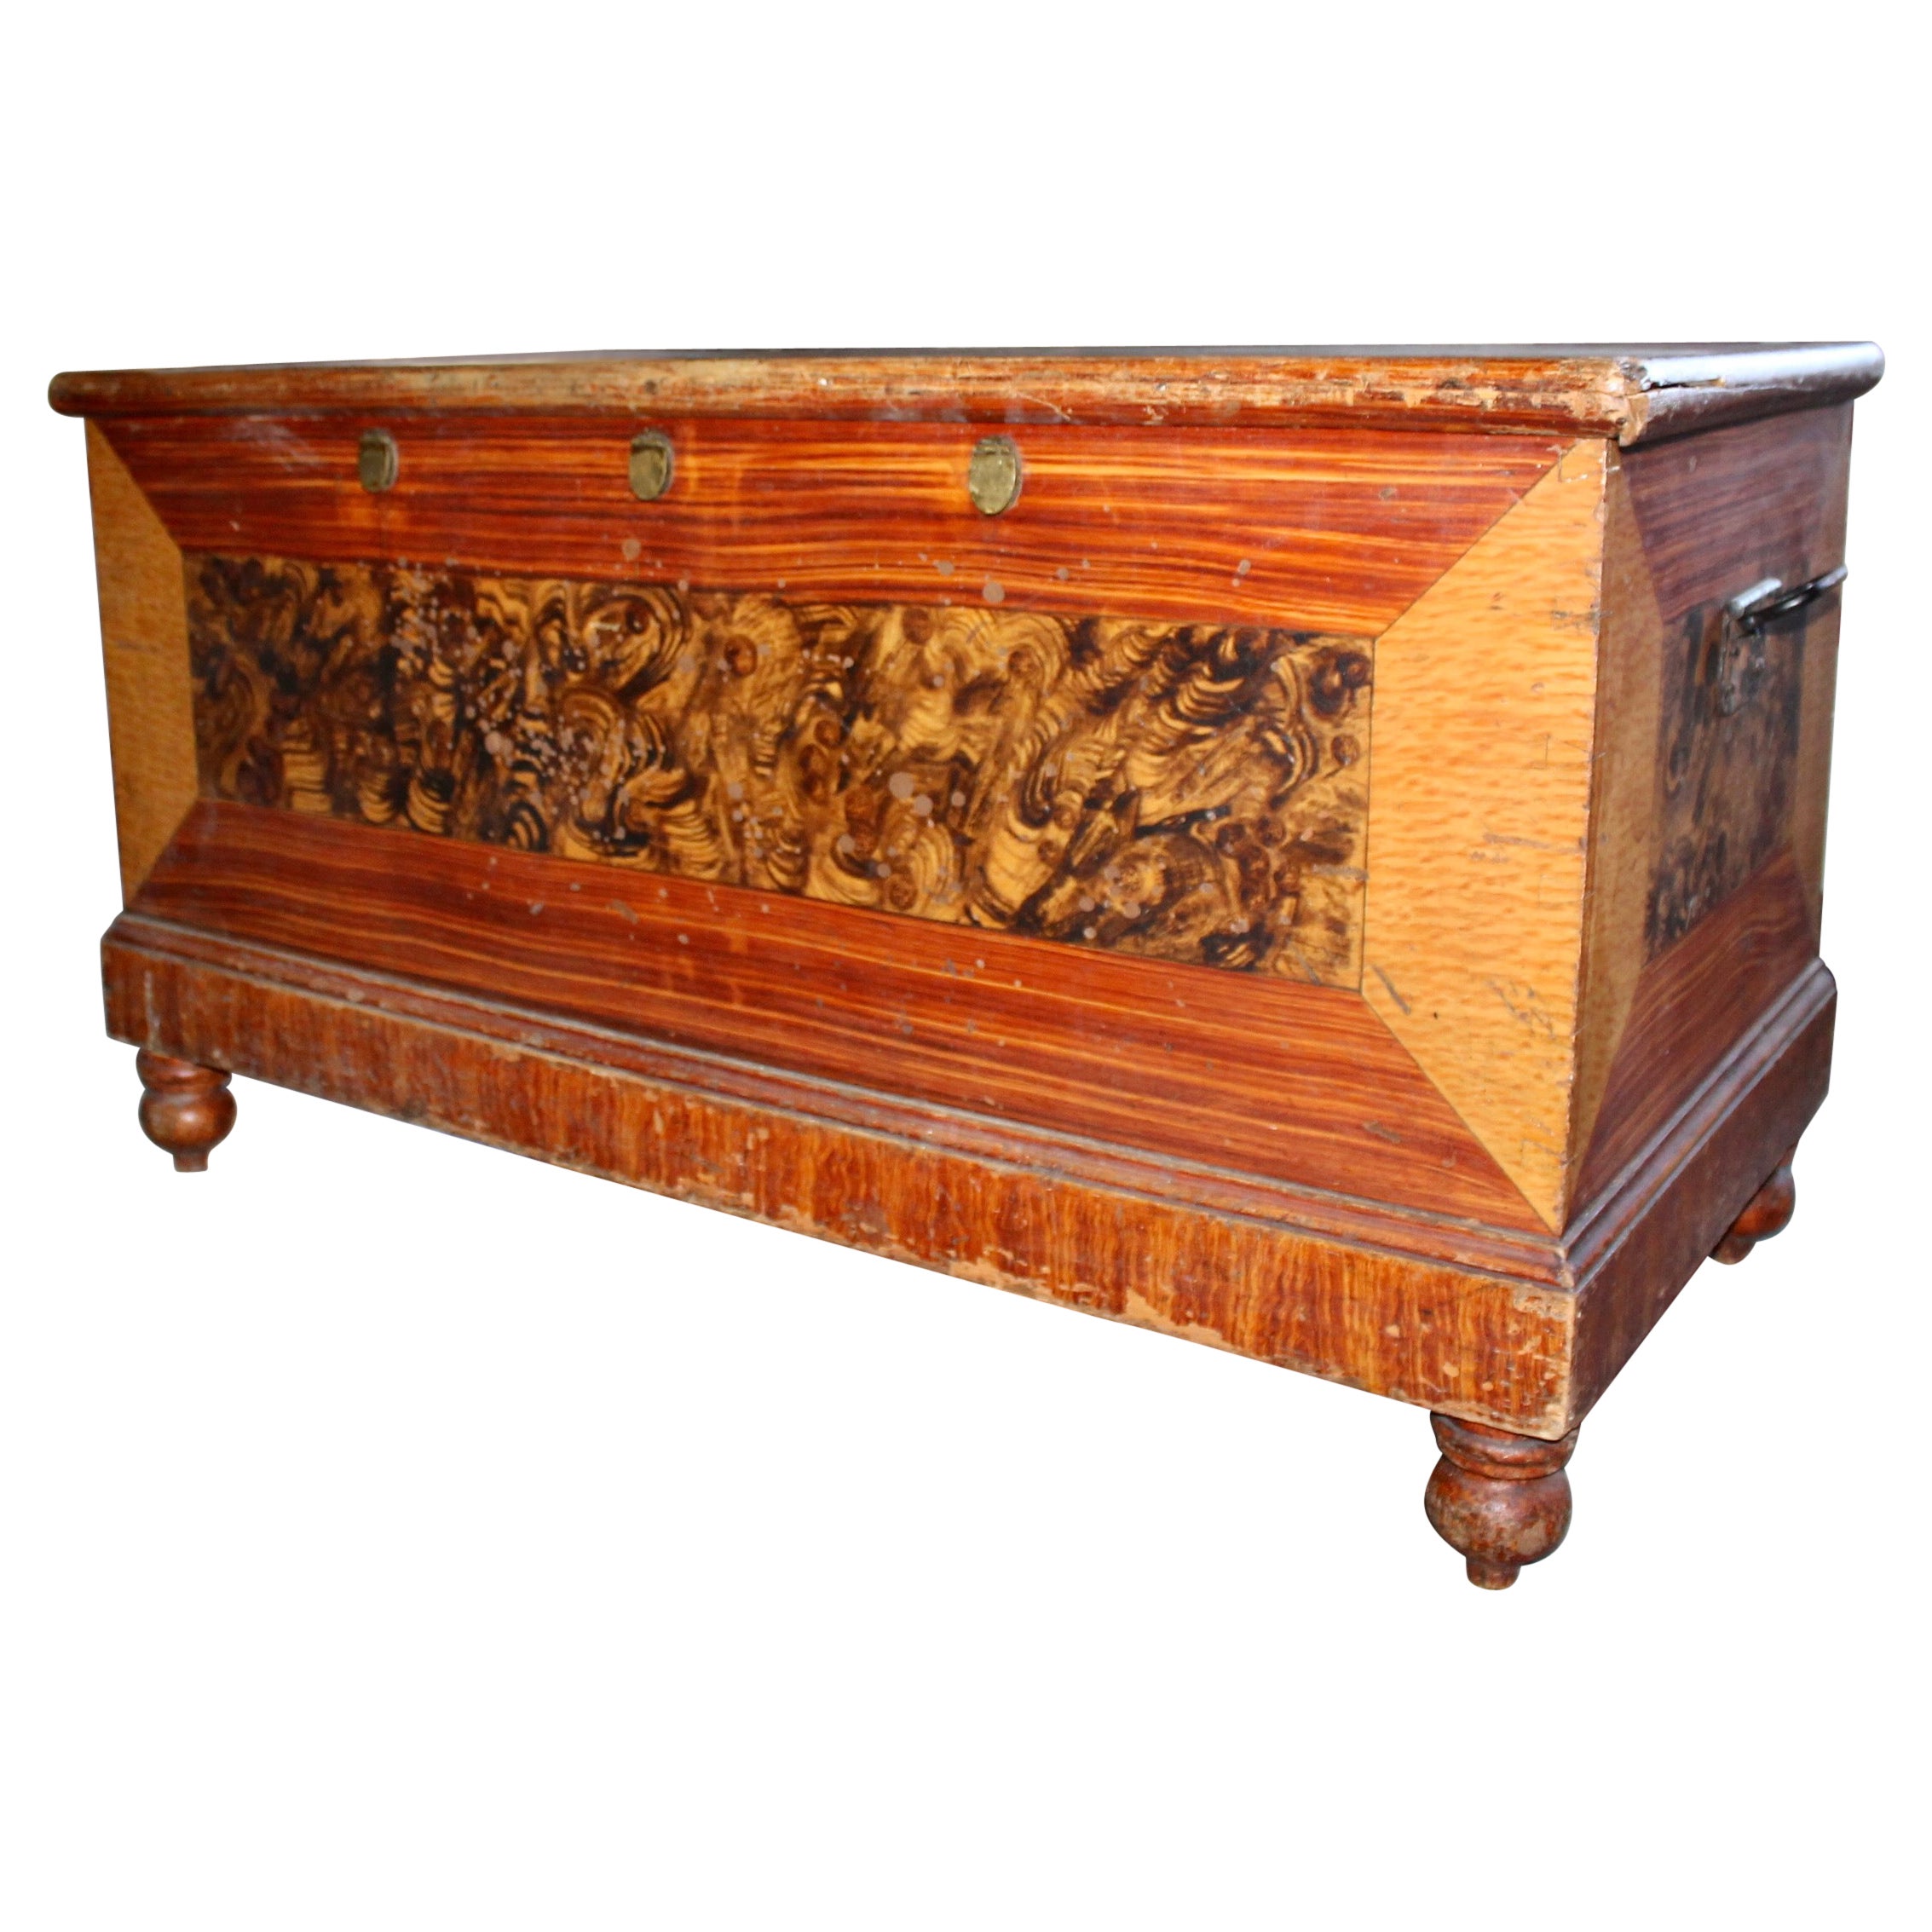 Pennsylvania Dower Chest with Original Painted Graining